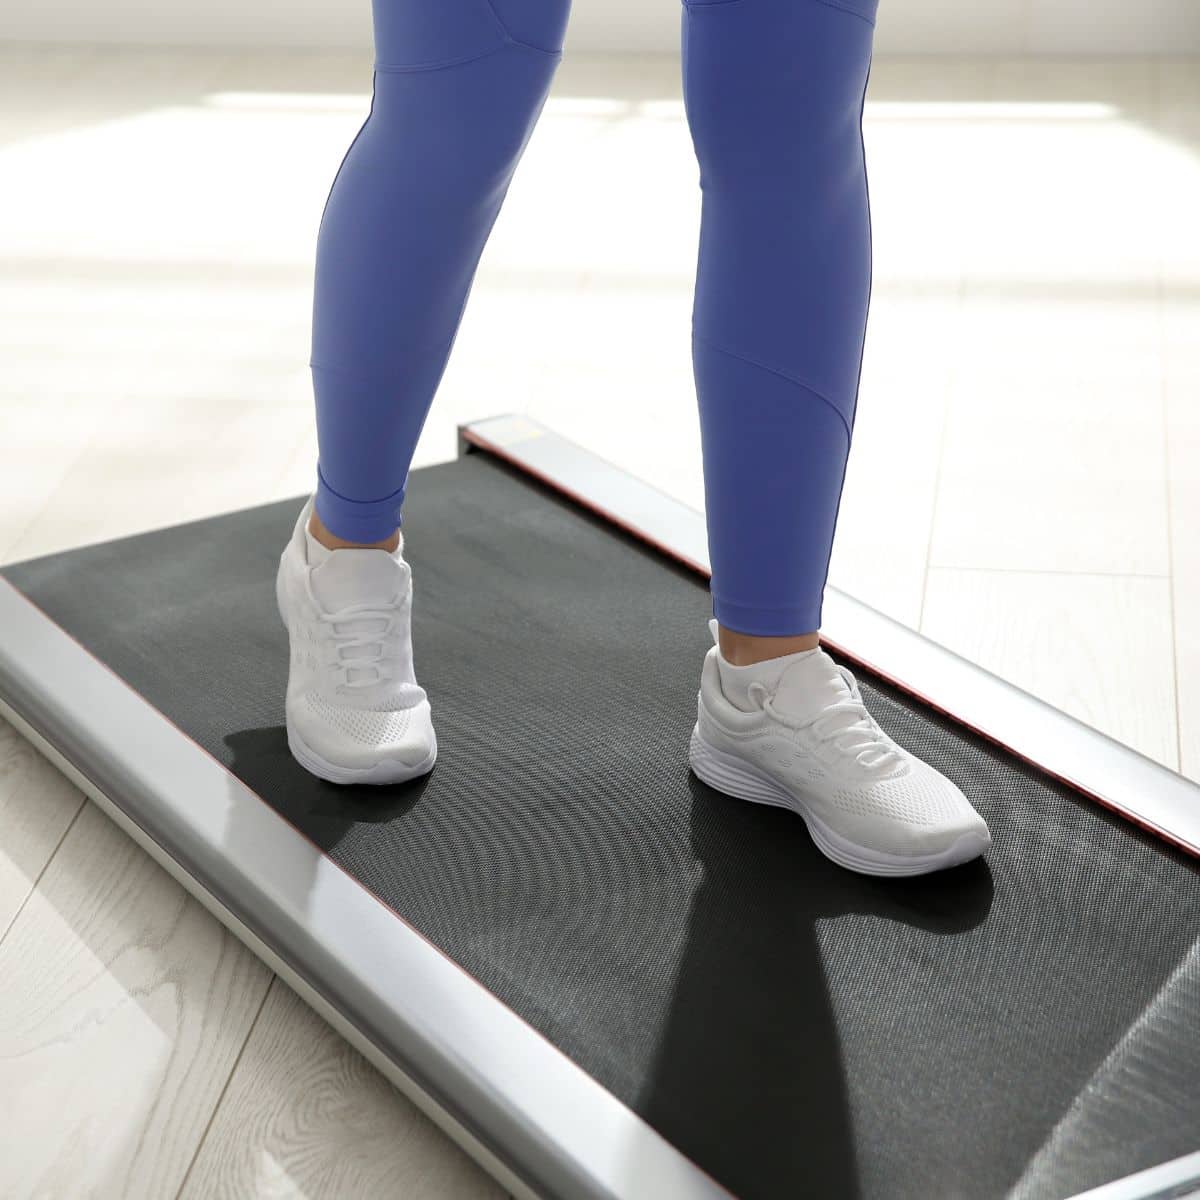 Is a Walking Pad Really Better Than a Treadmill?